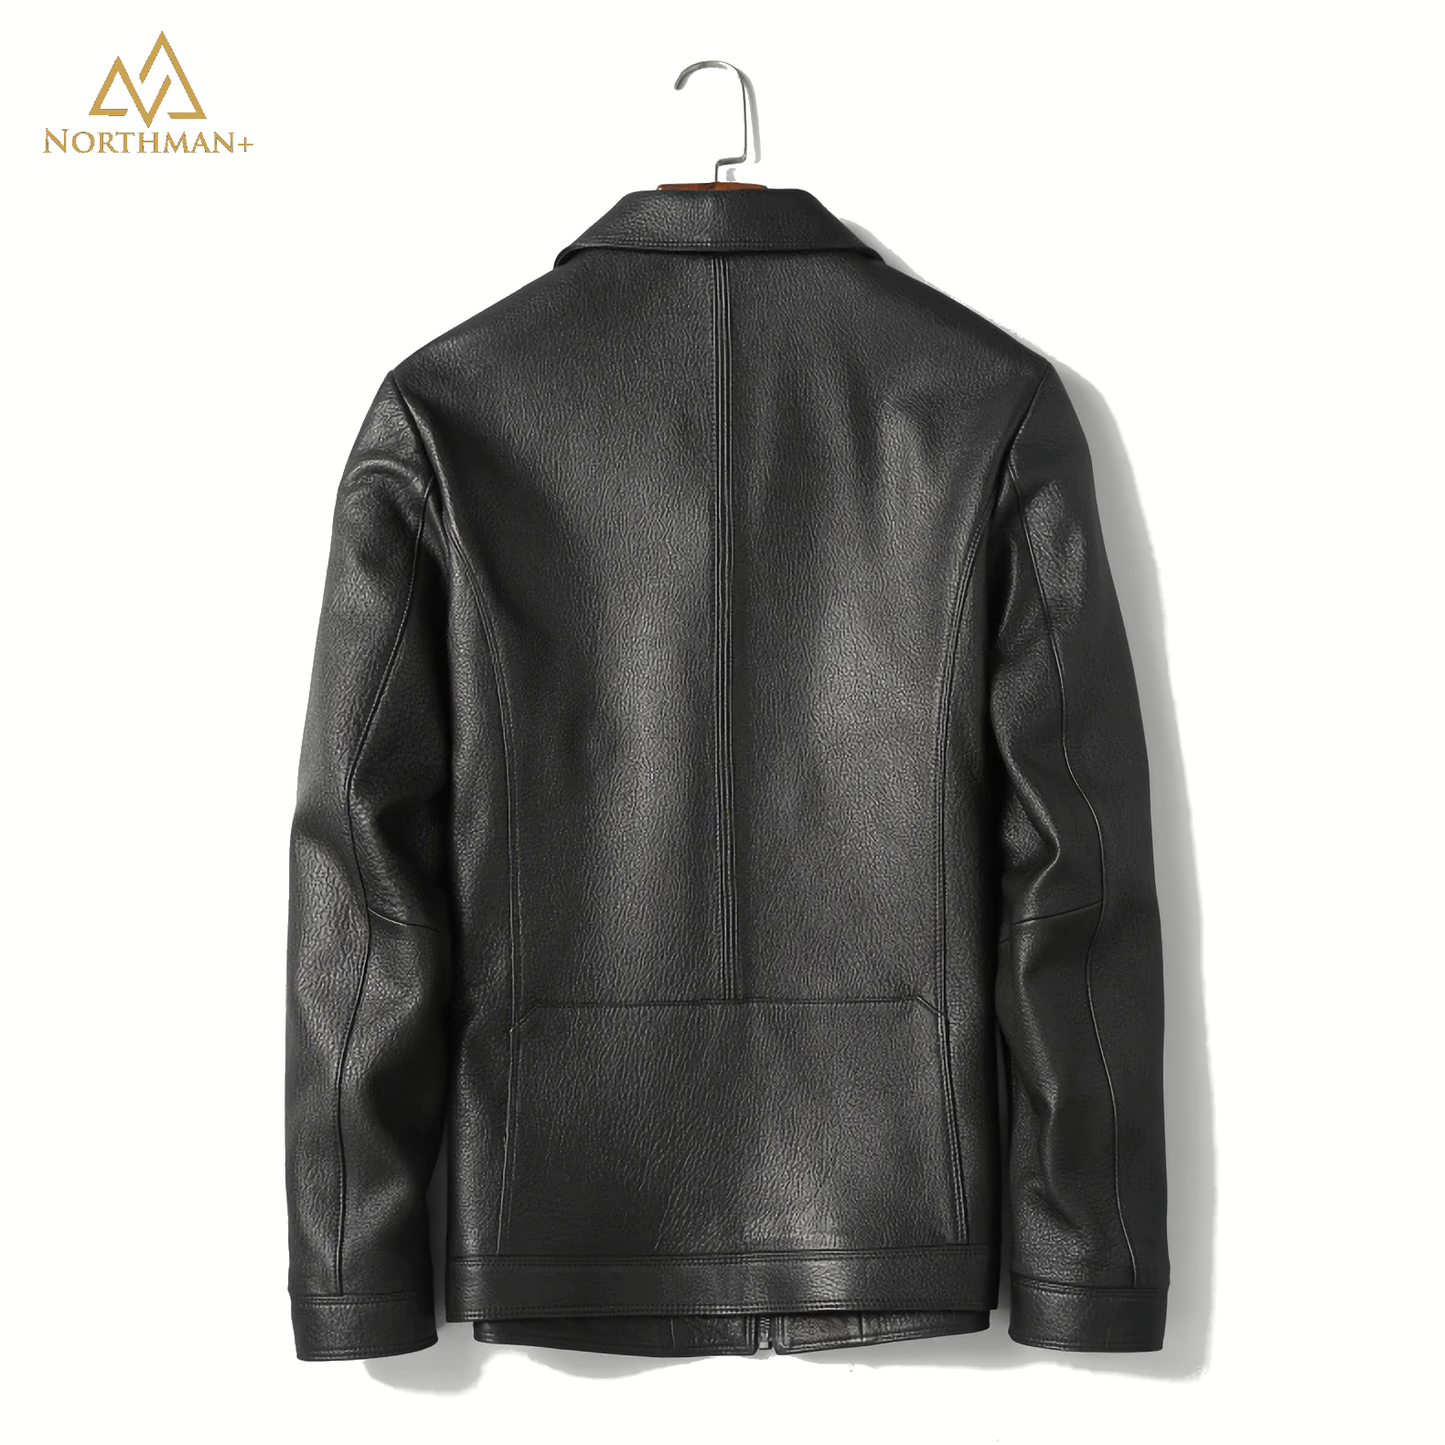 Straight Cut basic leather jacket for men